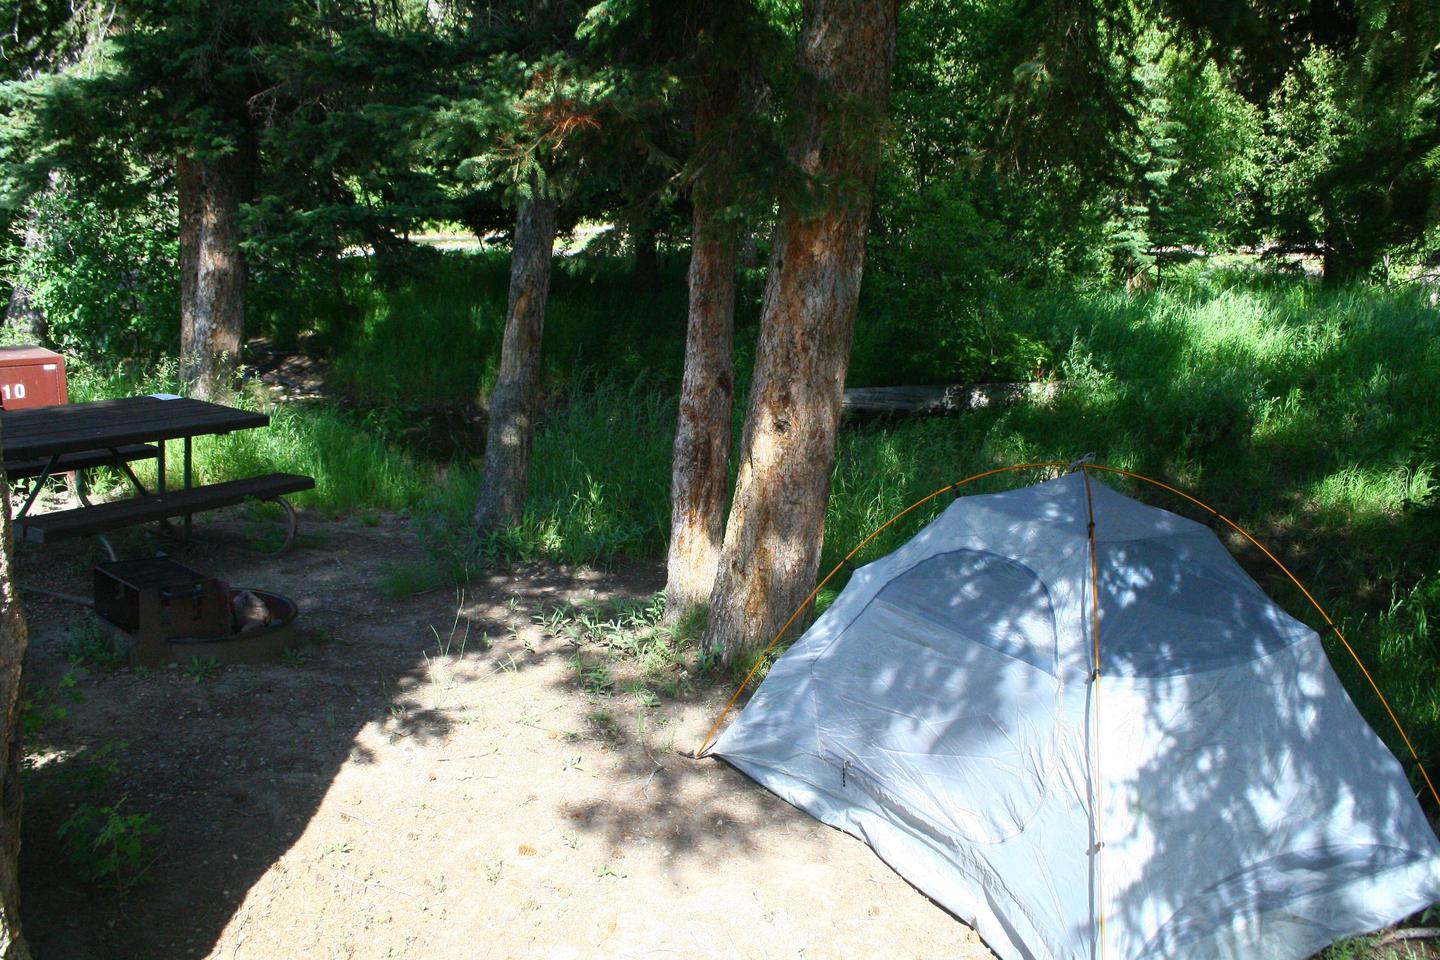 Slough Creek Campground site #10.Slough Creek Campground site #10